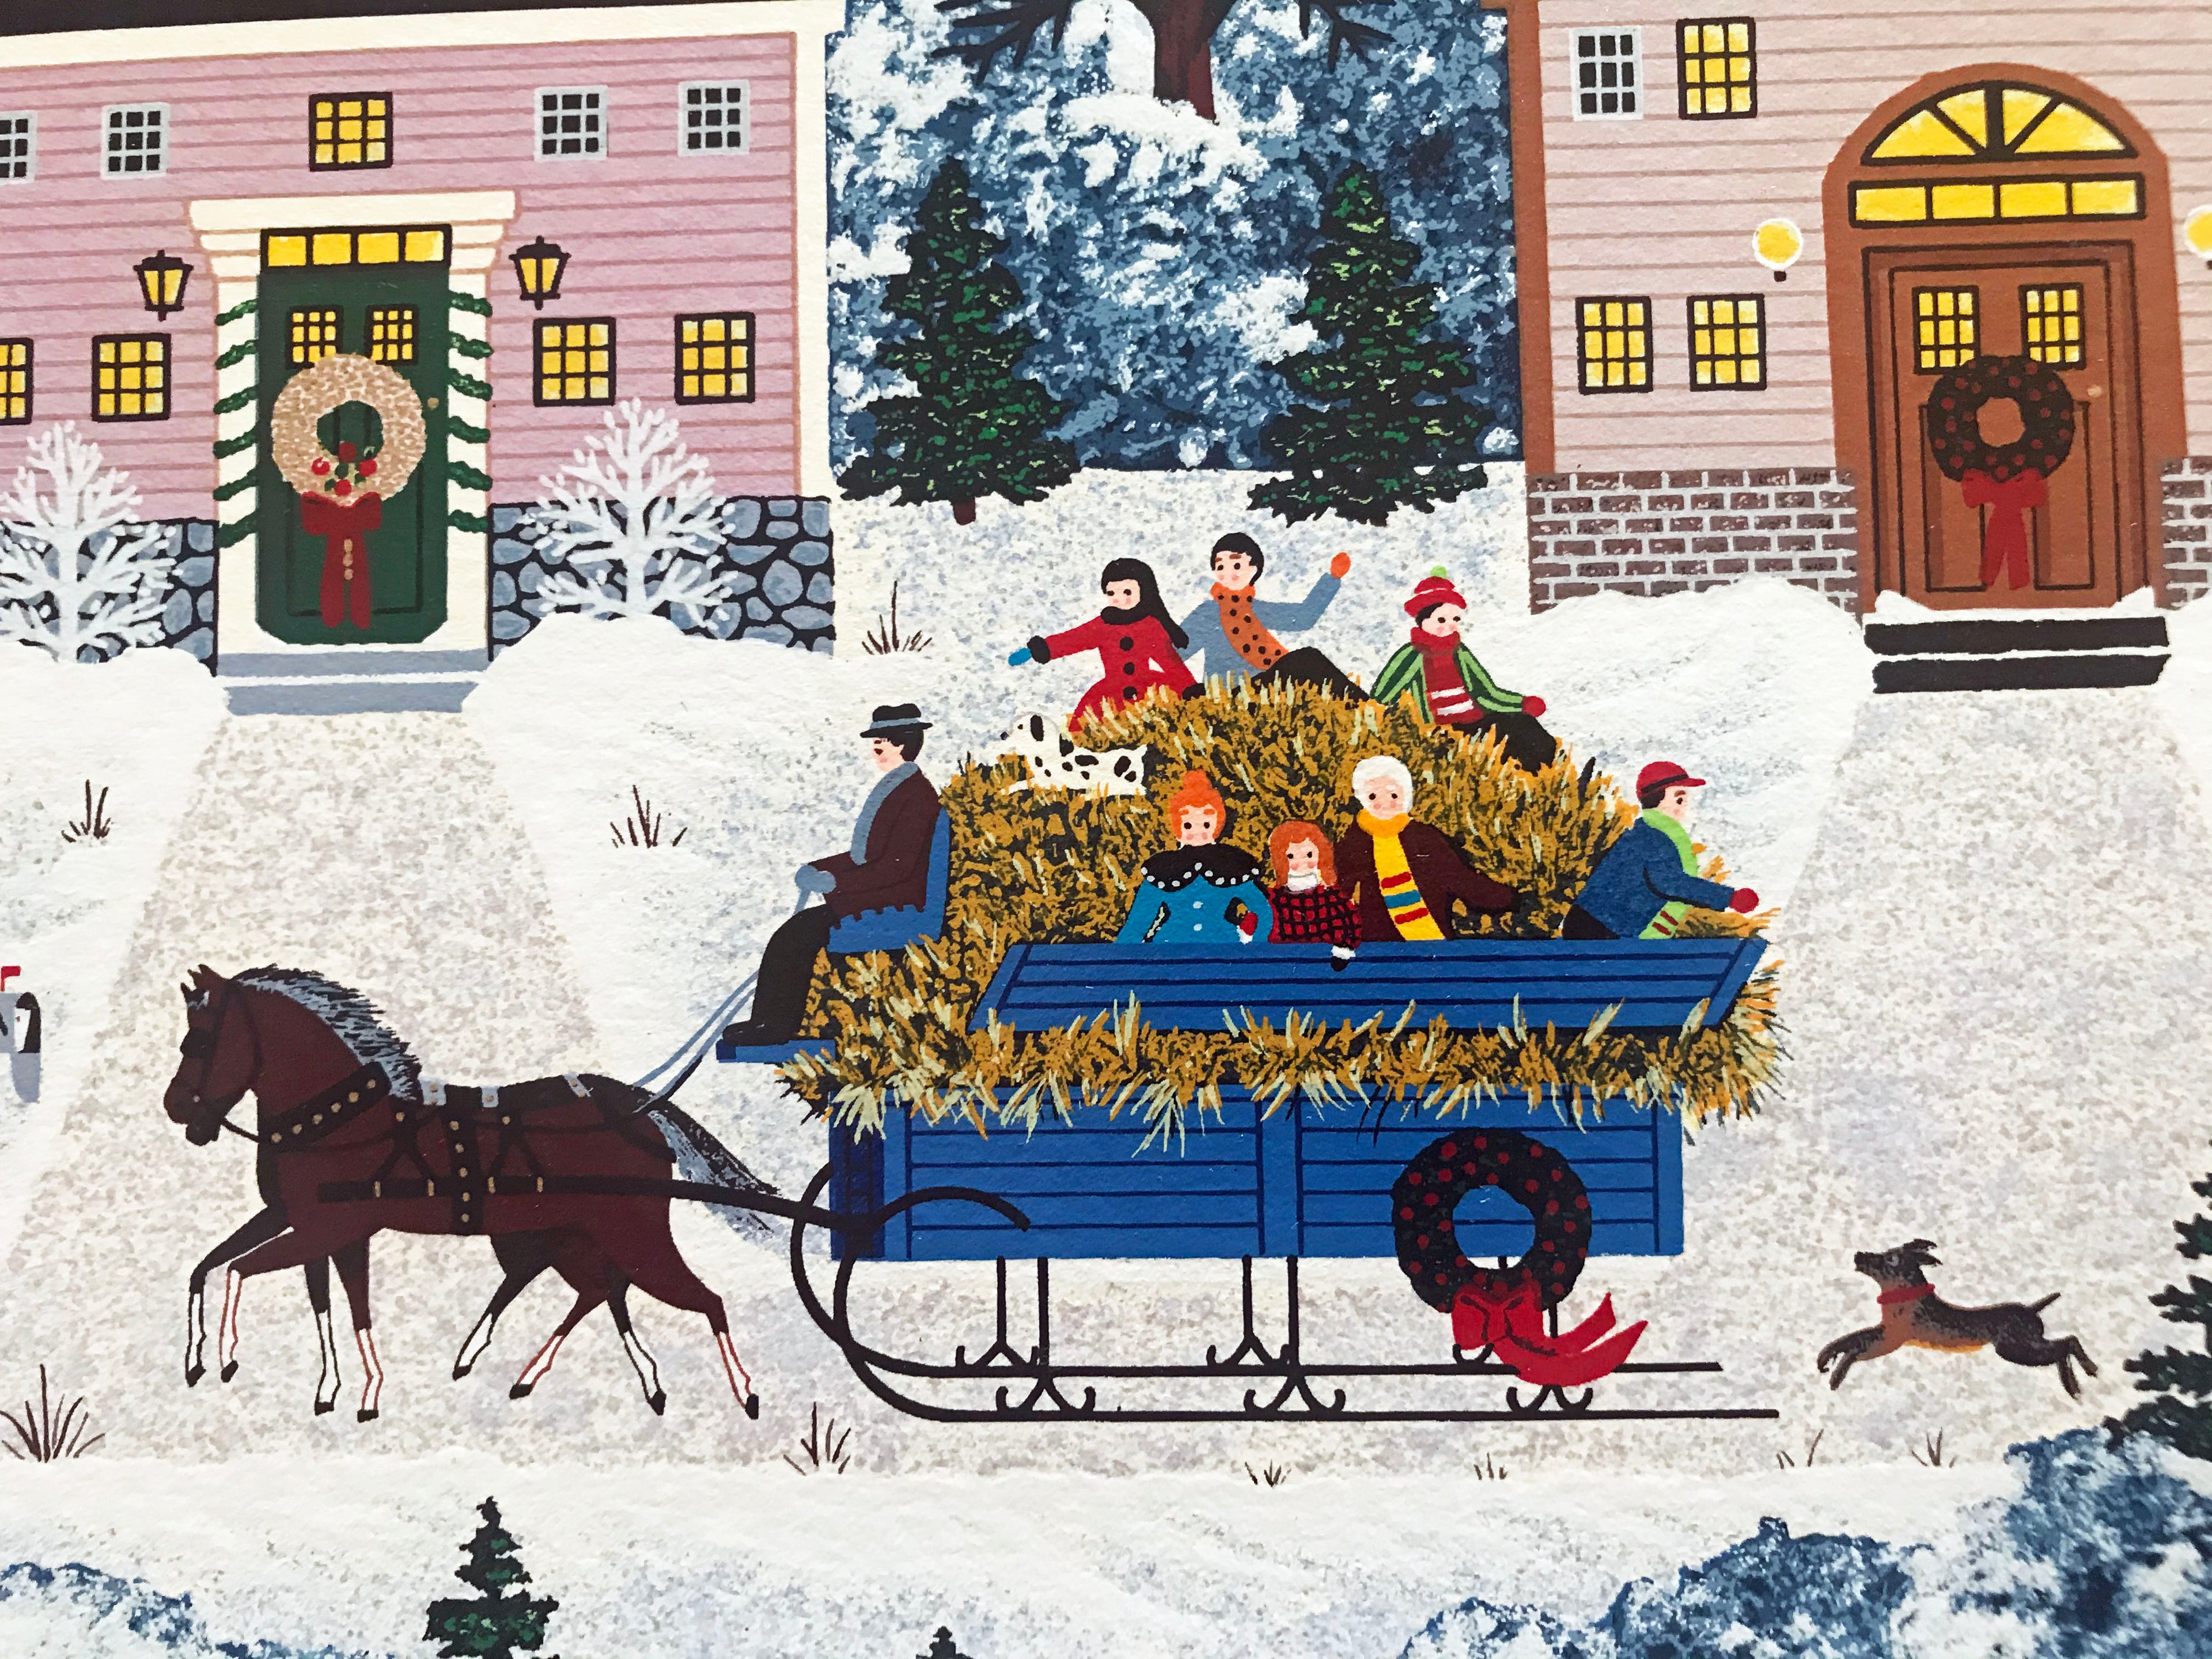 Holiday Sleigh Ride Jane Wooster Scott Artist Proof Serigraph Print Hand Signed and AP Numbered